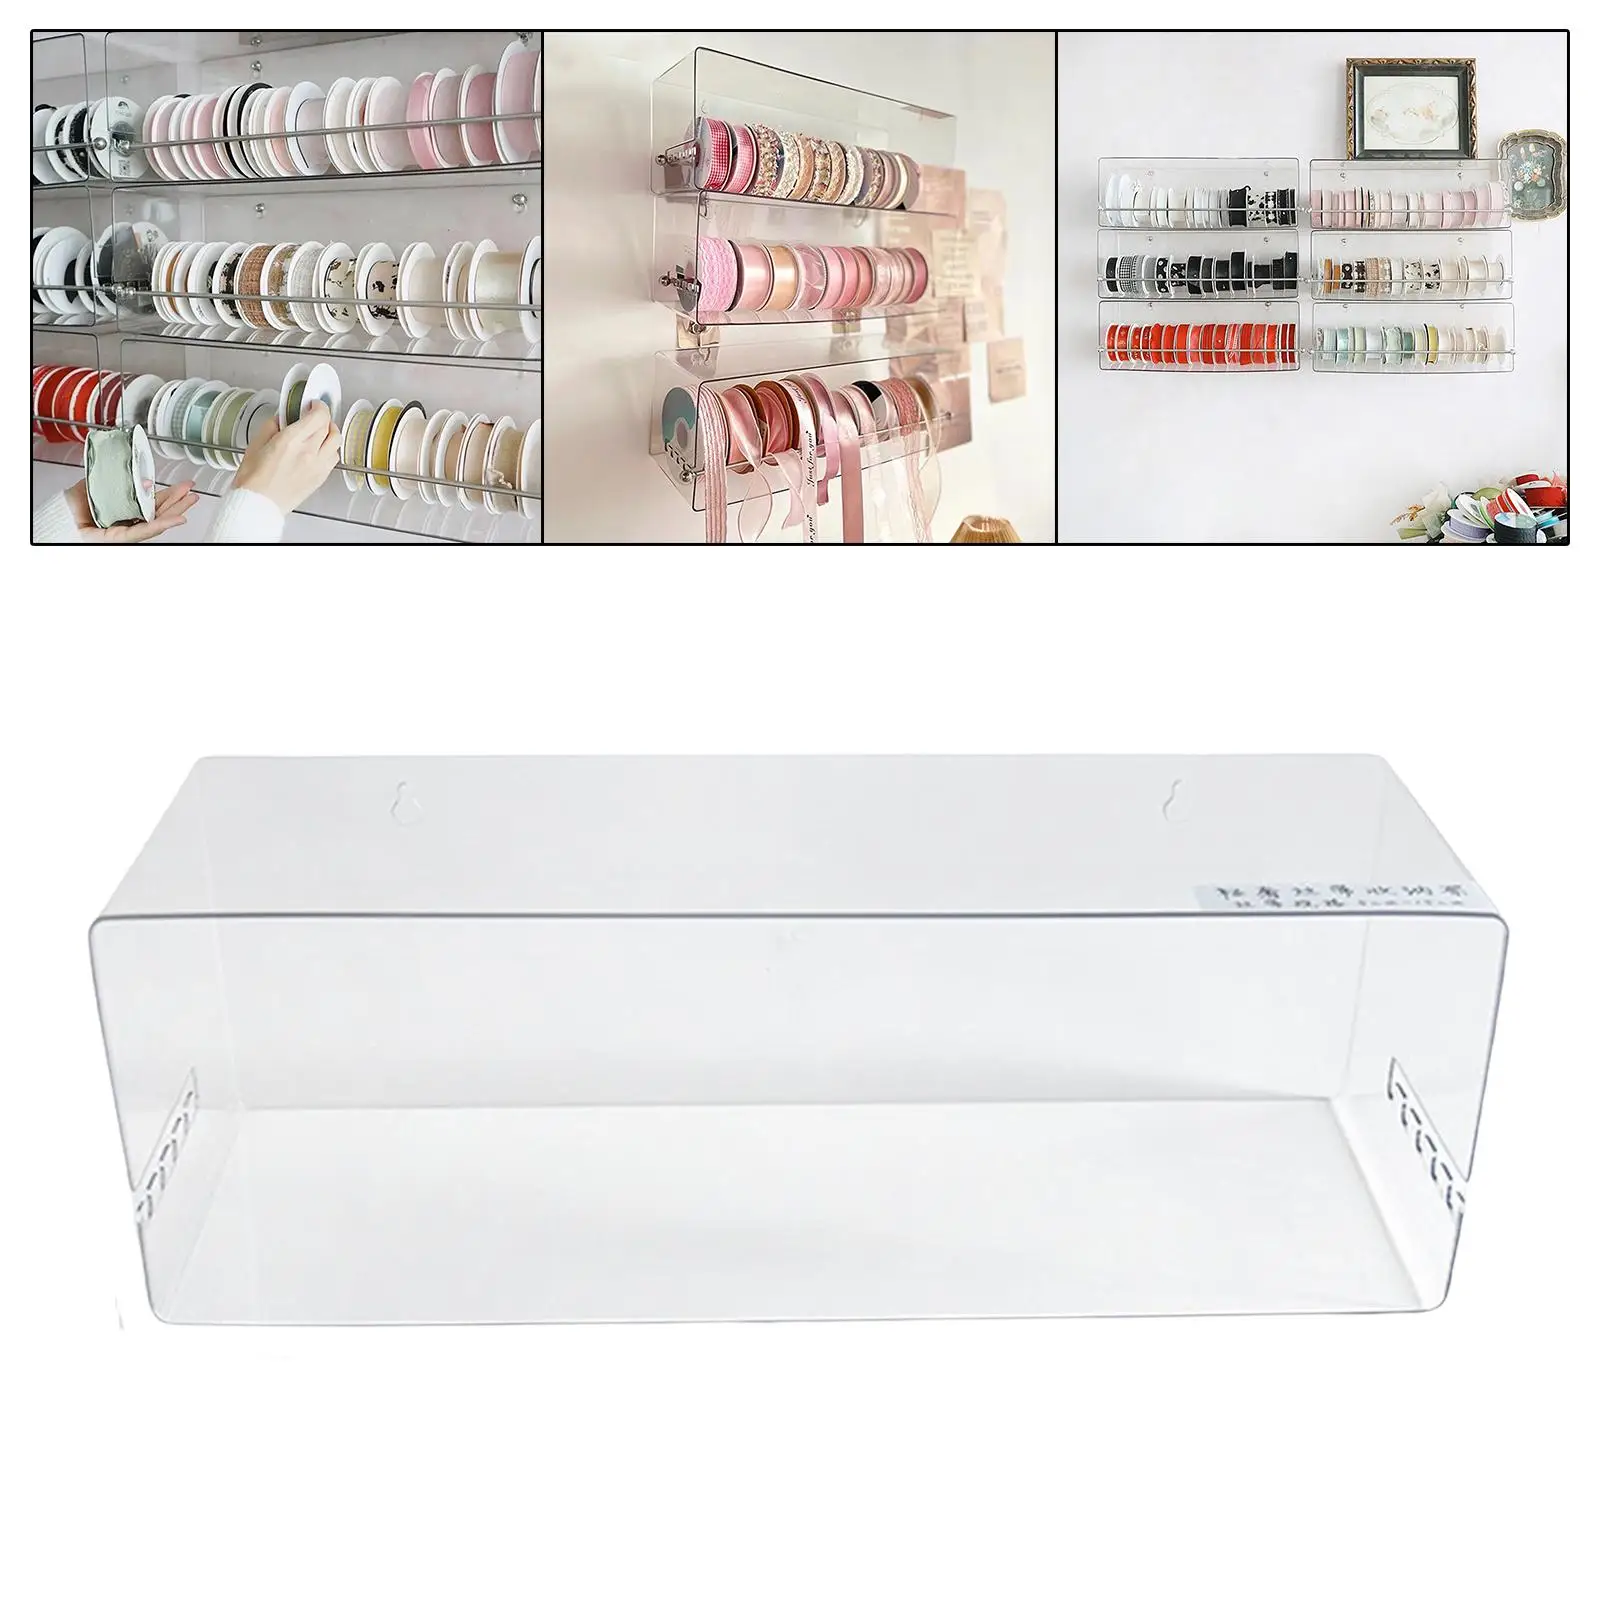 Washi Tape Organizer Sewing Thread Spool Rack Transparent for Home Sundries